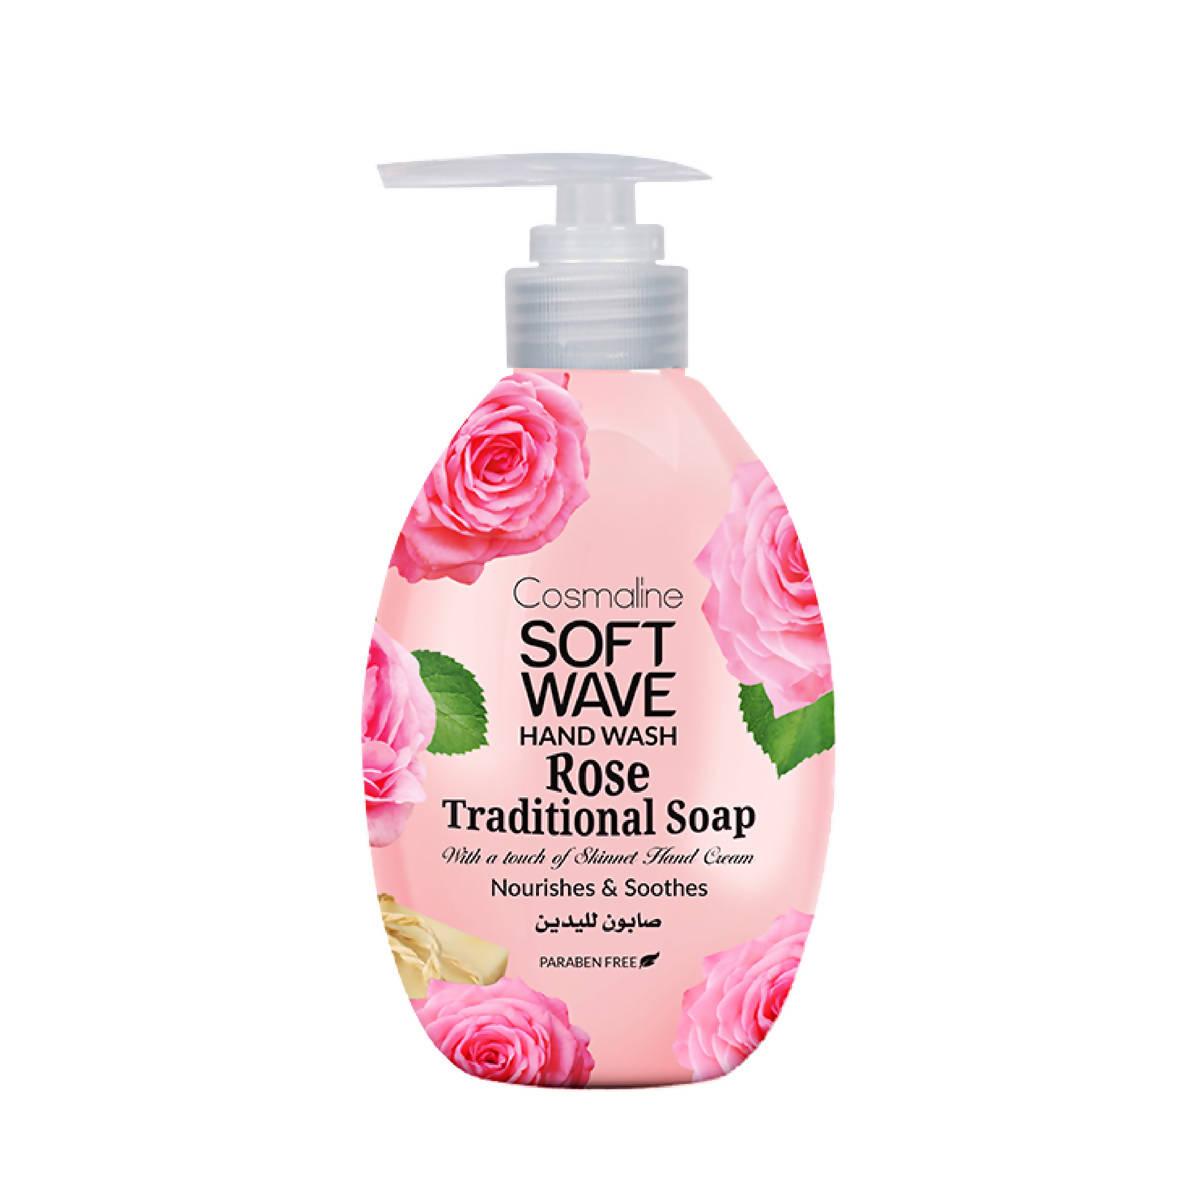 SOFTWAVE HAND WASH TRADITIONAL SOAP & ROSE - 550ml